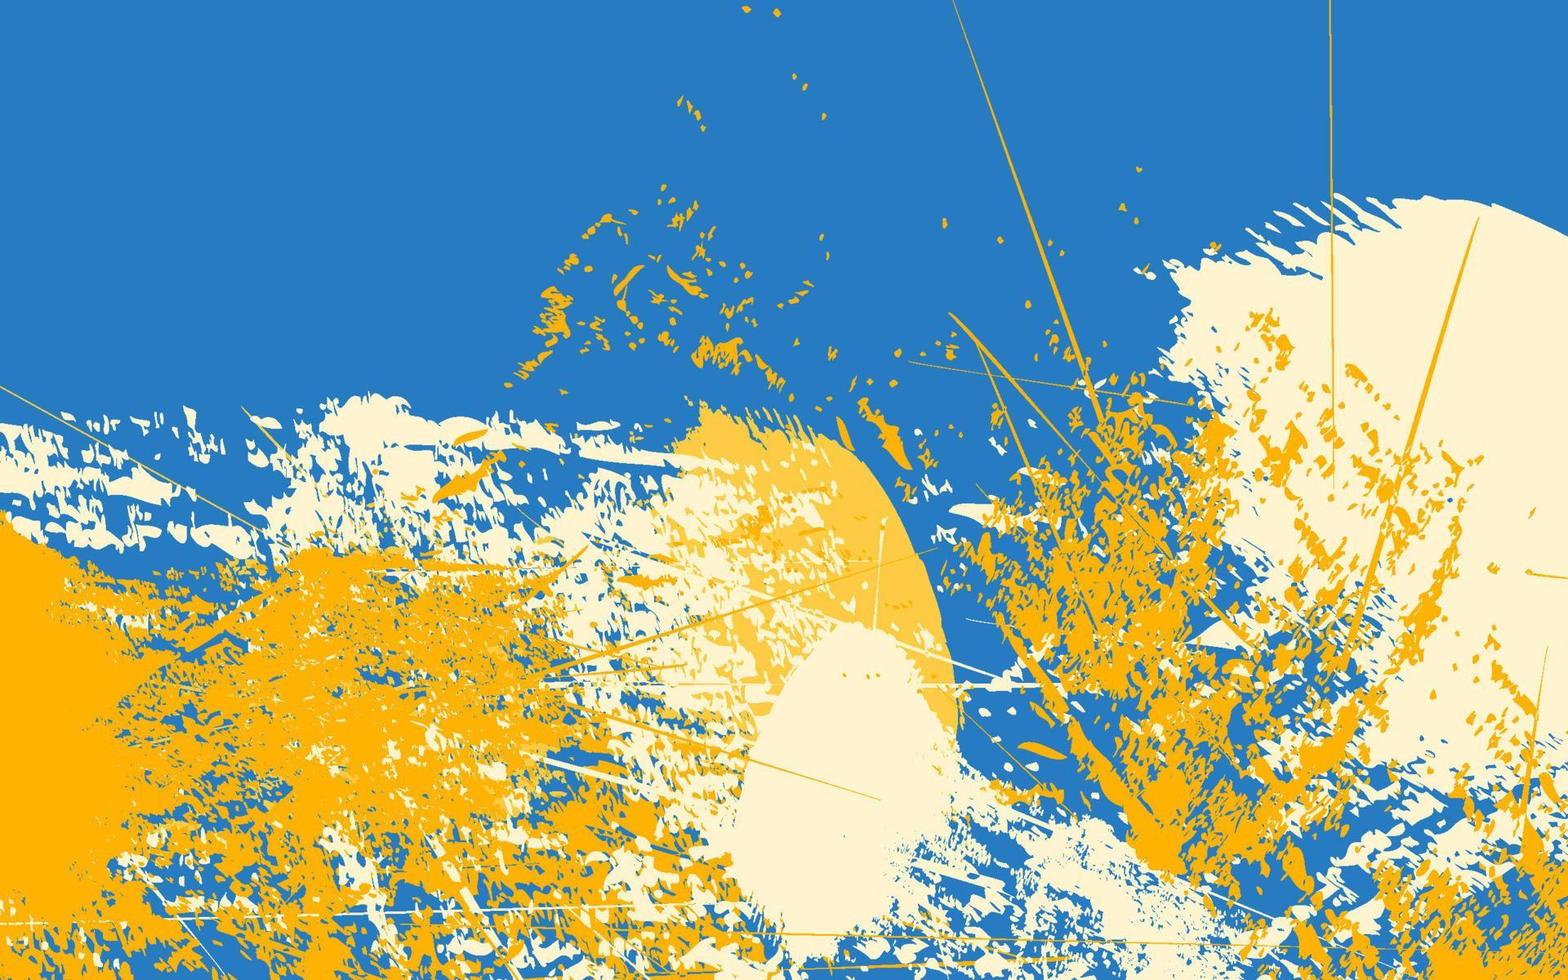 Abstract grunge texture blue and yellow background vector